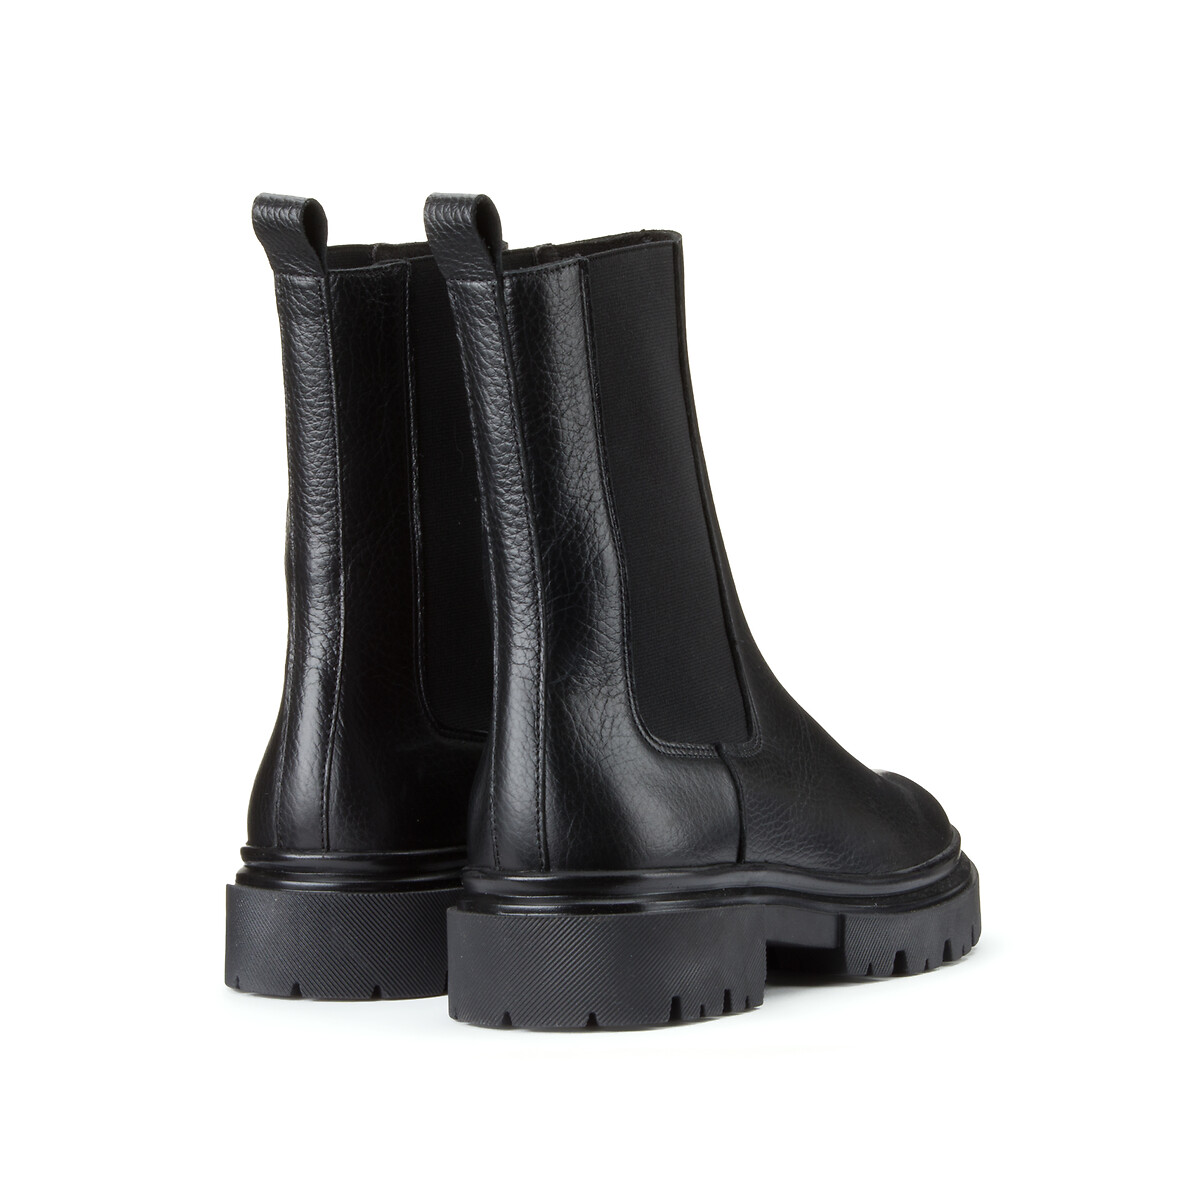 La Redoute Fille Chaussures Bottes Bottines Bottines cuir chelsea Nycco 